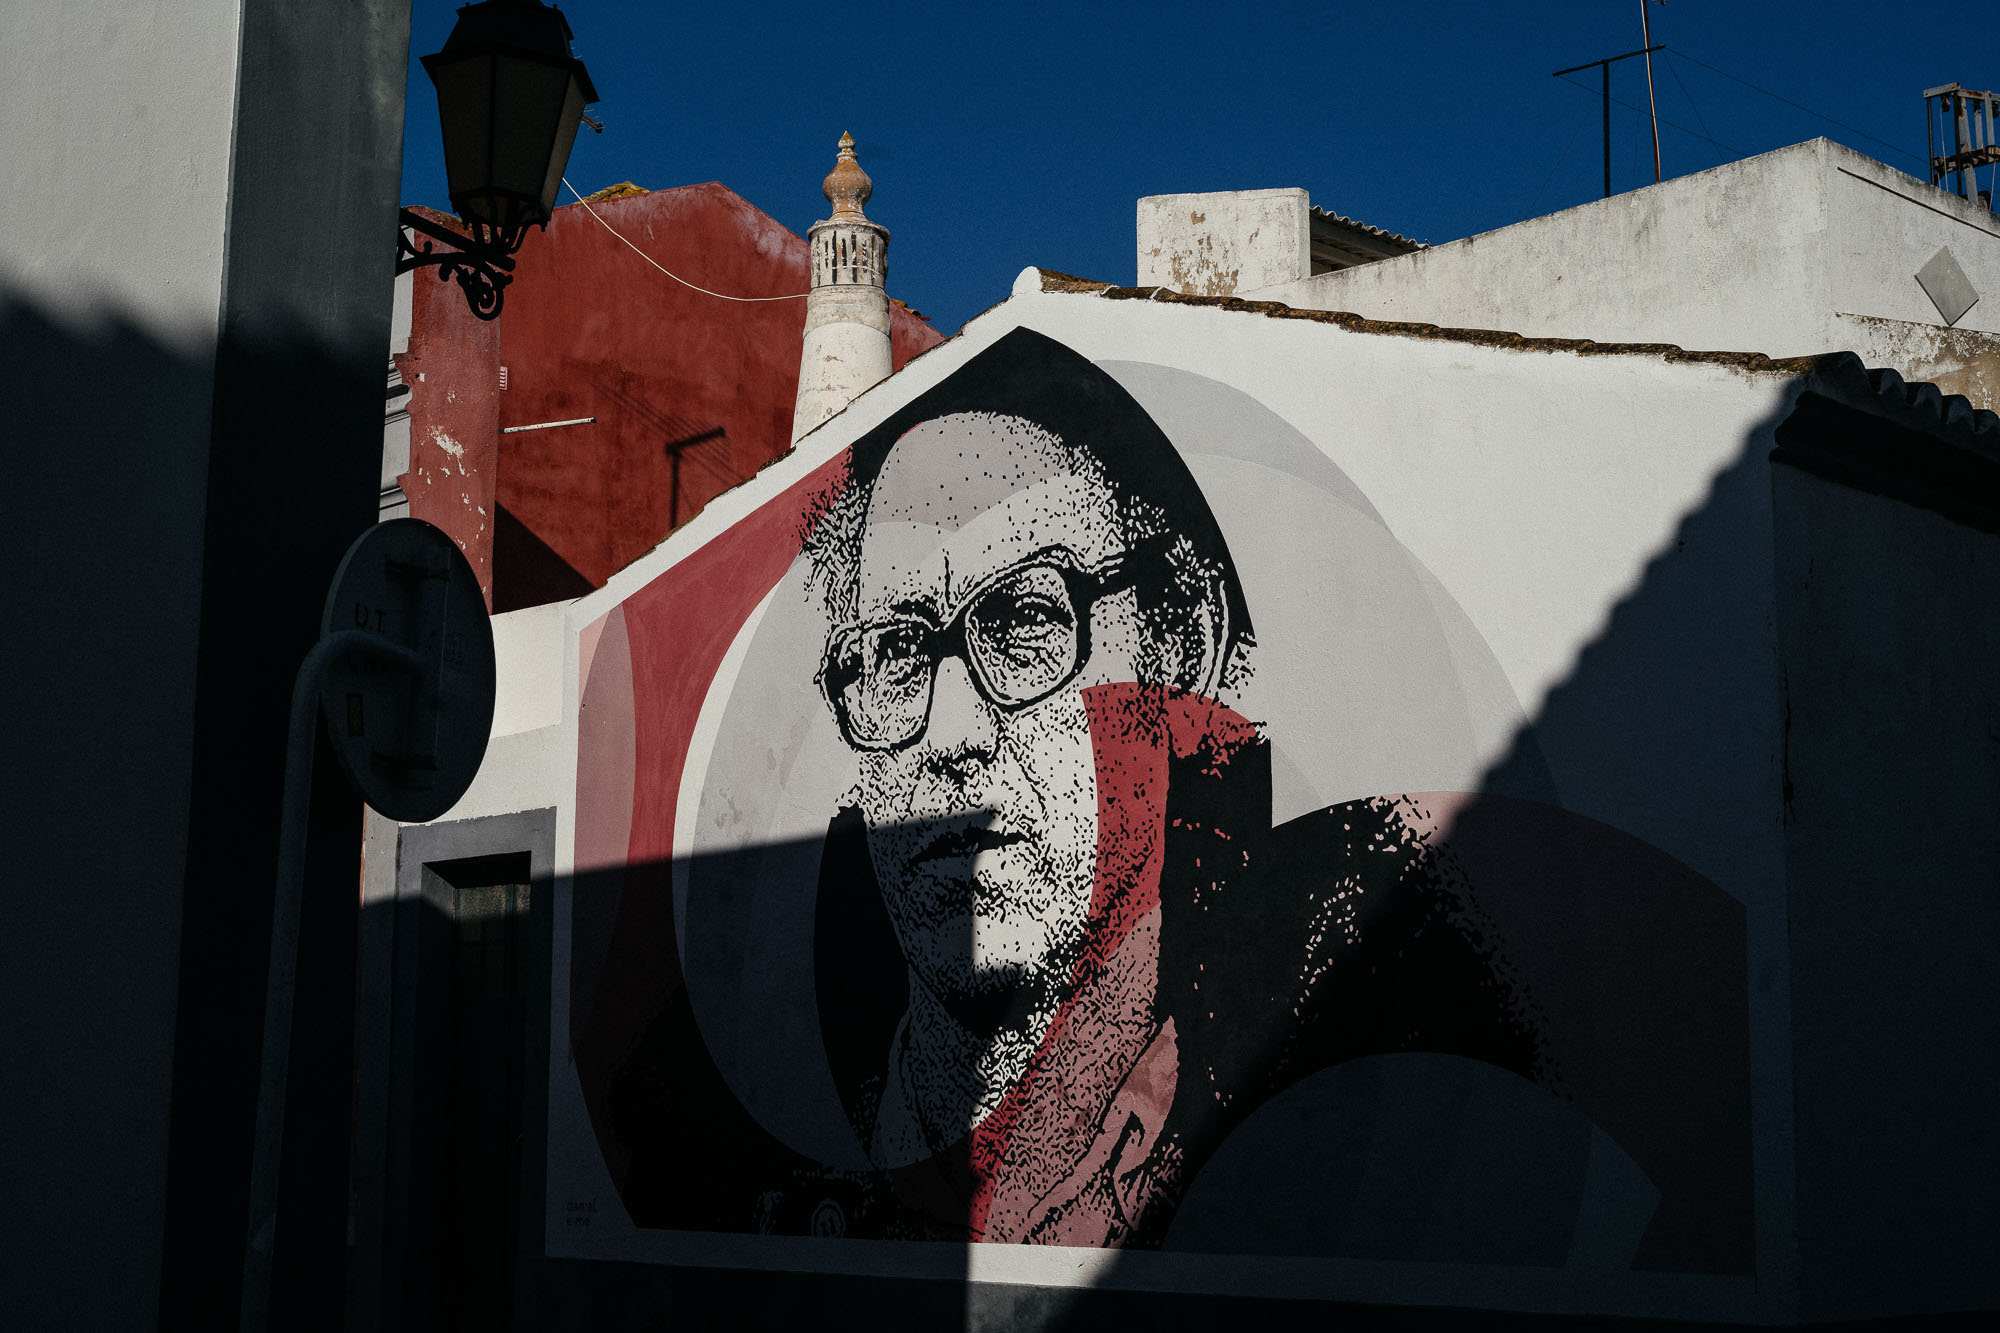 mural of man in glasses painted on side of building in faro